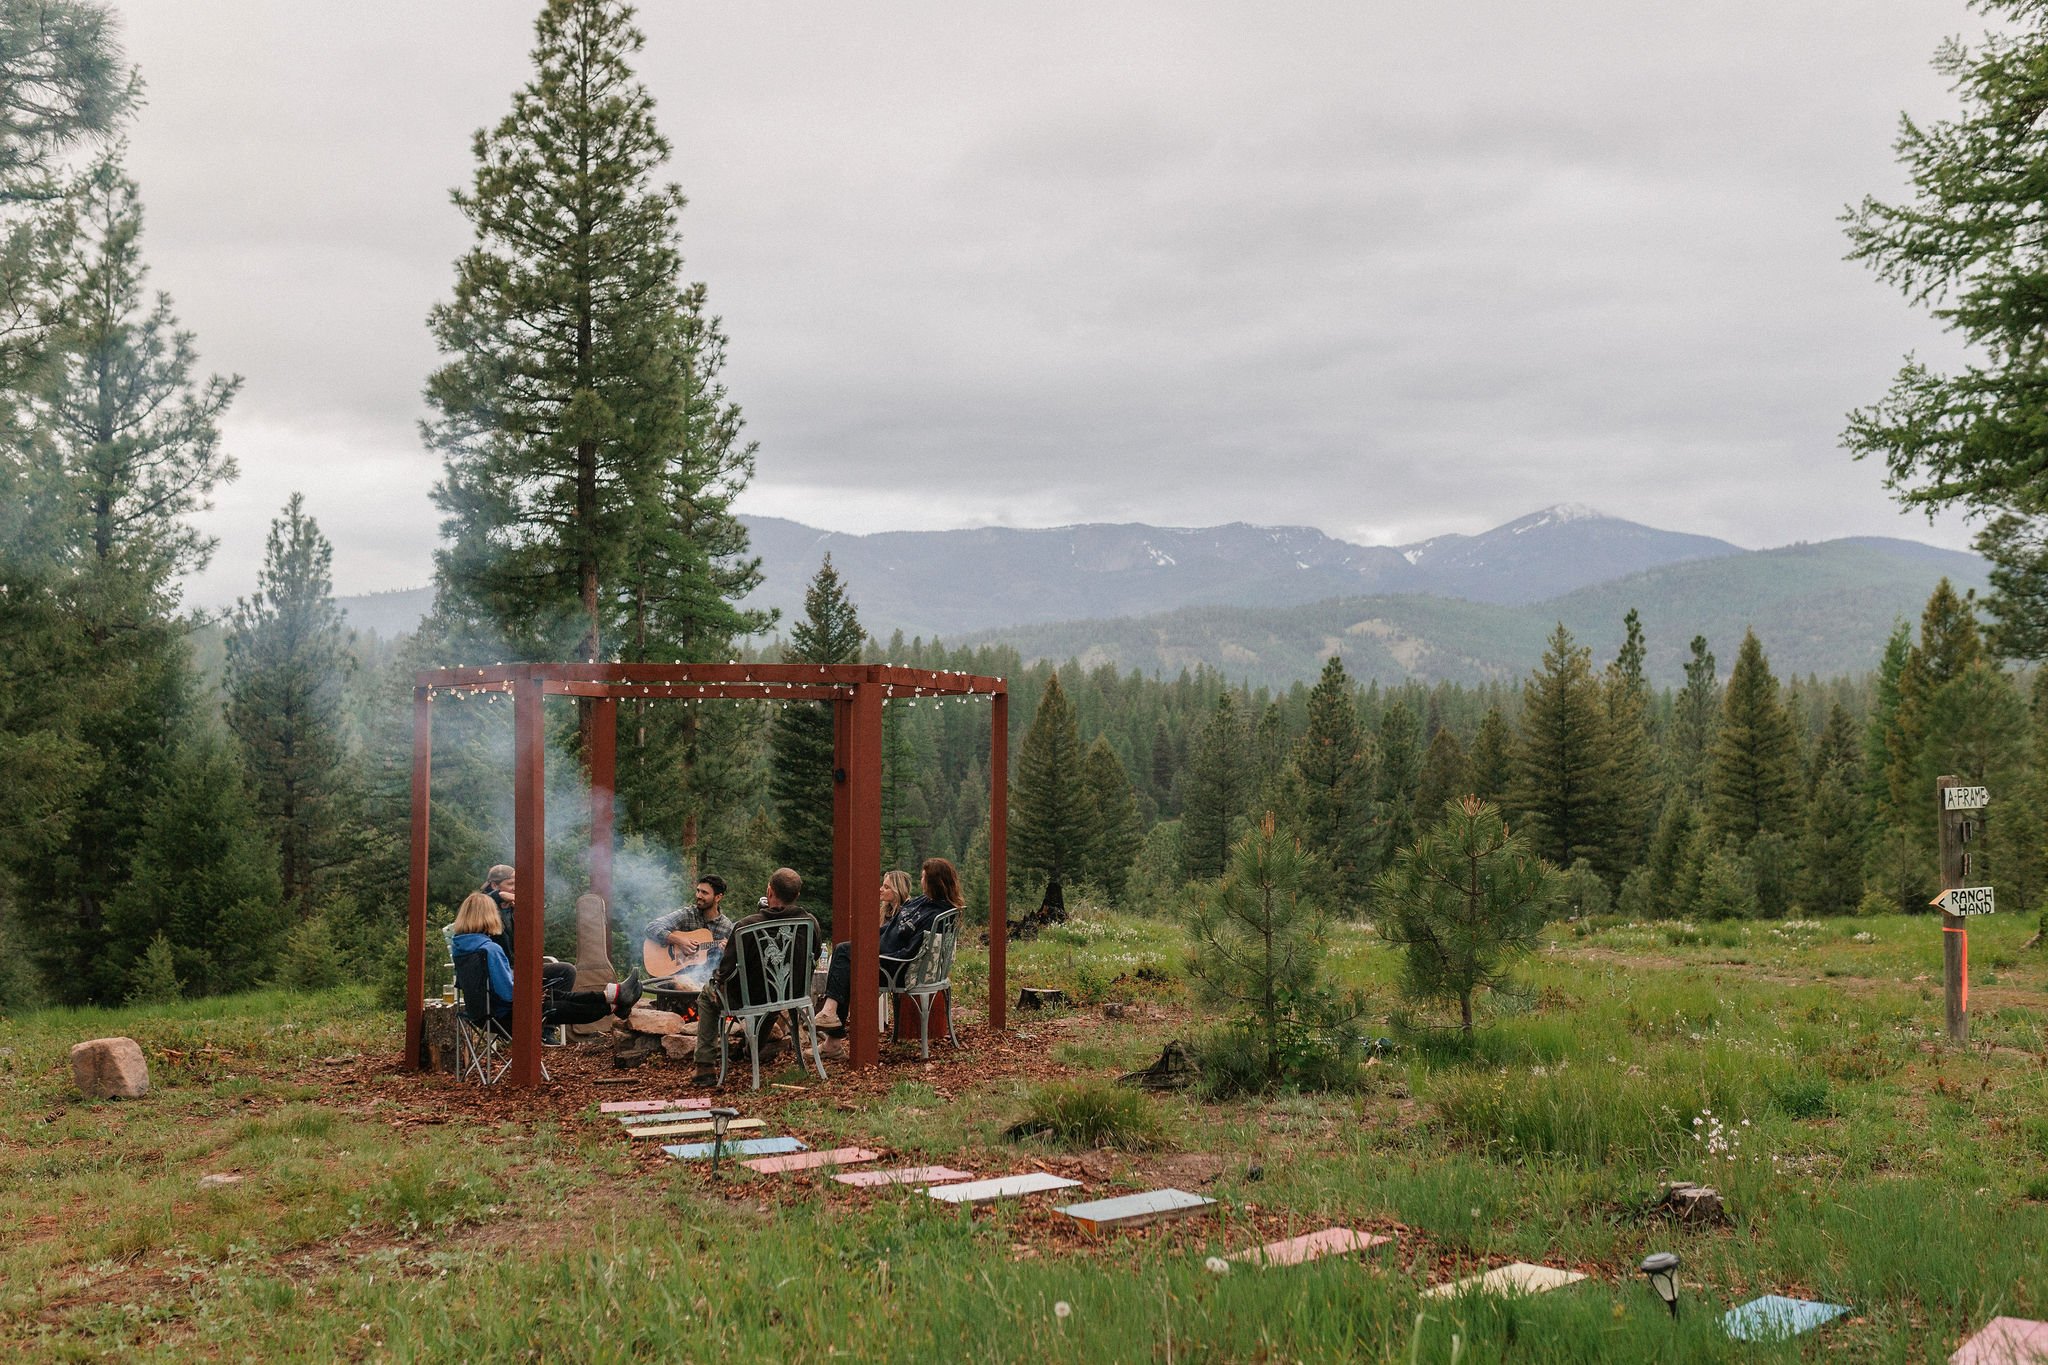 Connect with other guests at the communal fire pit and enjoy the majestic mountain views at The Hohnstead Glamping Cabins Resort.